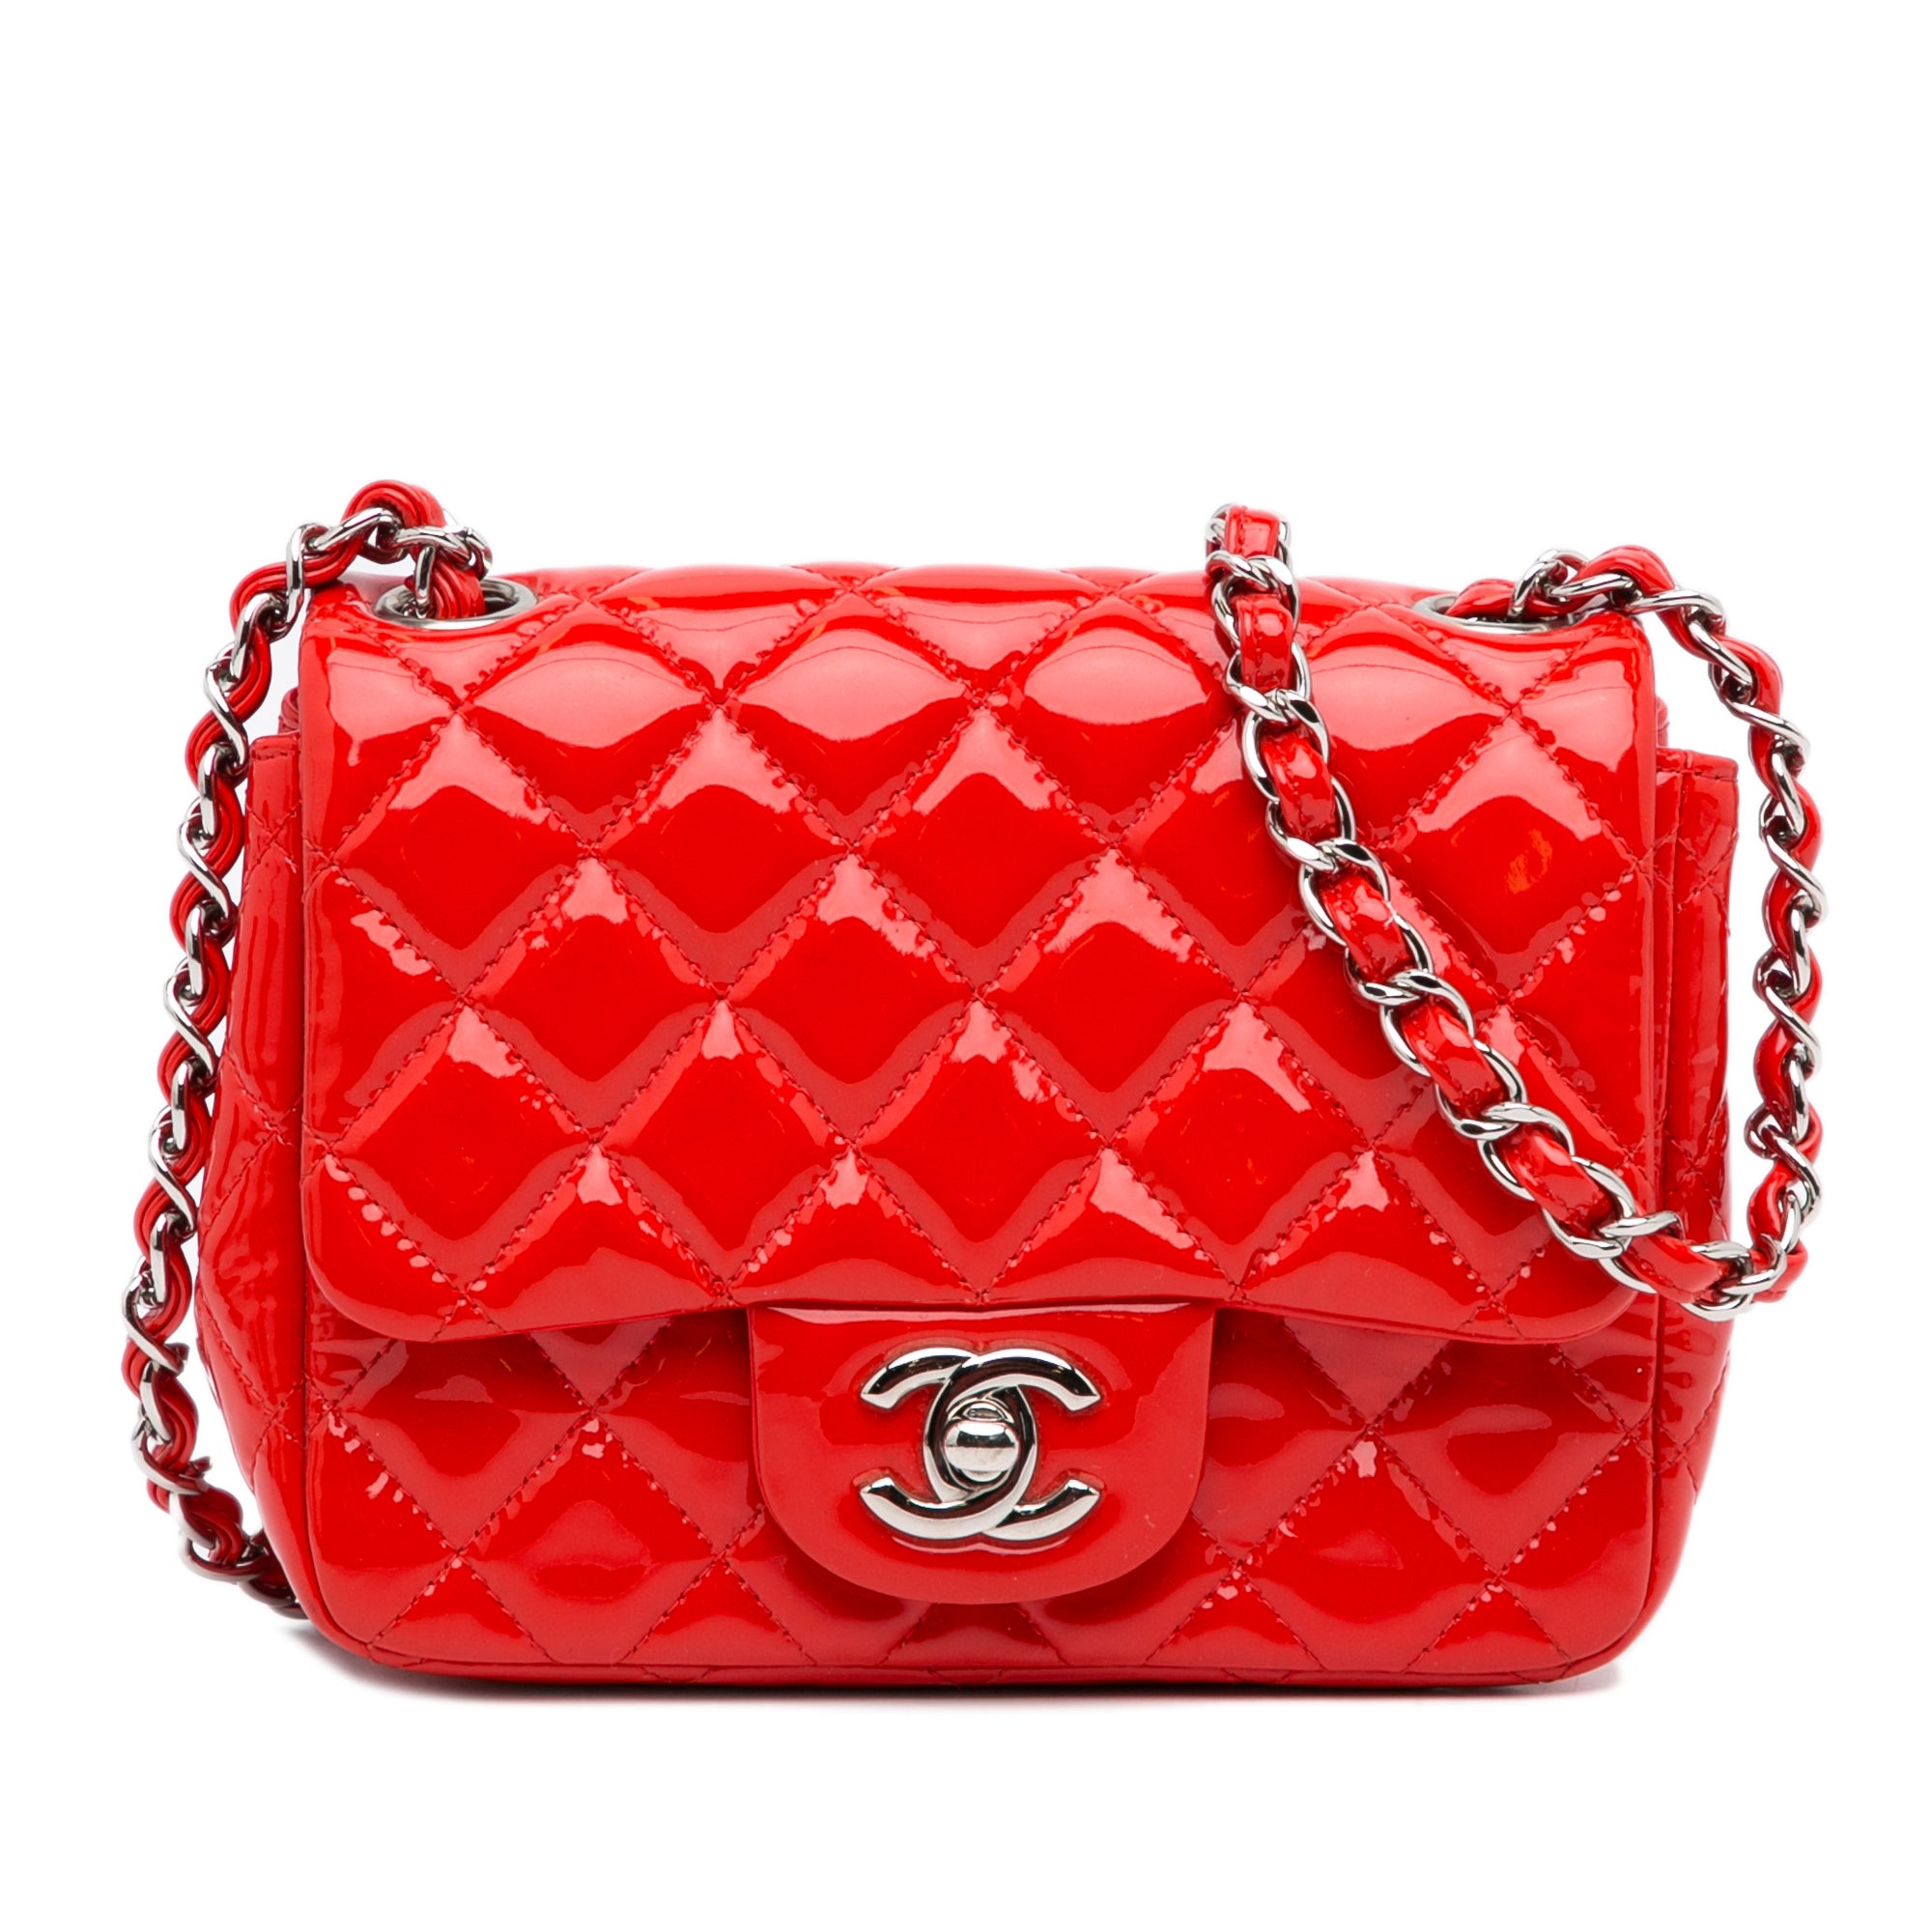 Chanel Mini Classic Flap Quilted Lambskin Bag in Dark Red  Worlds Best